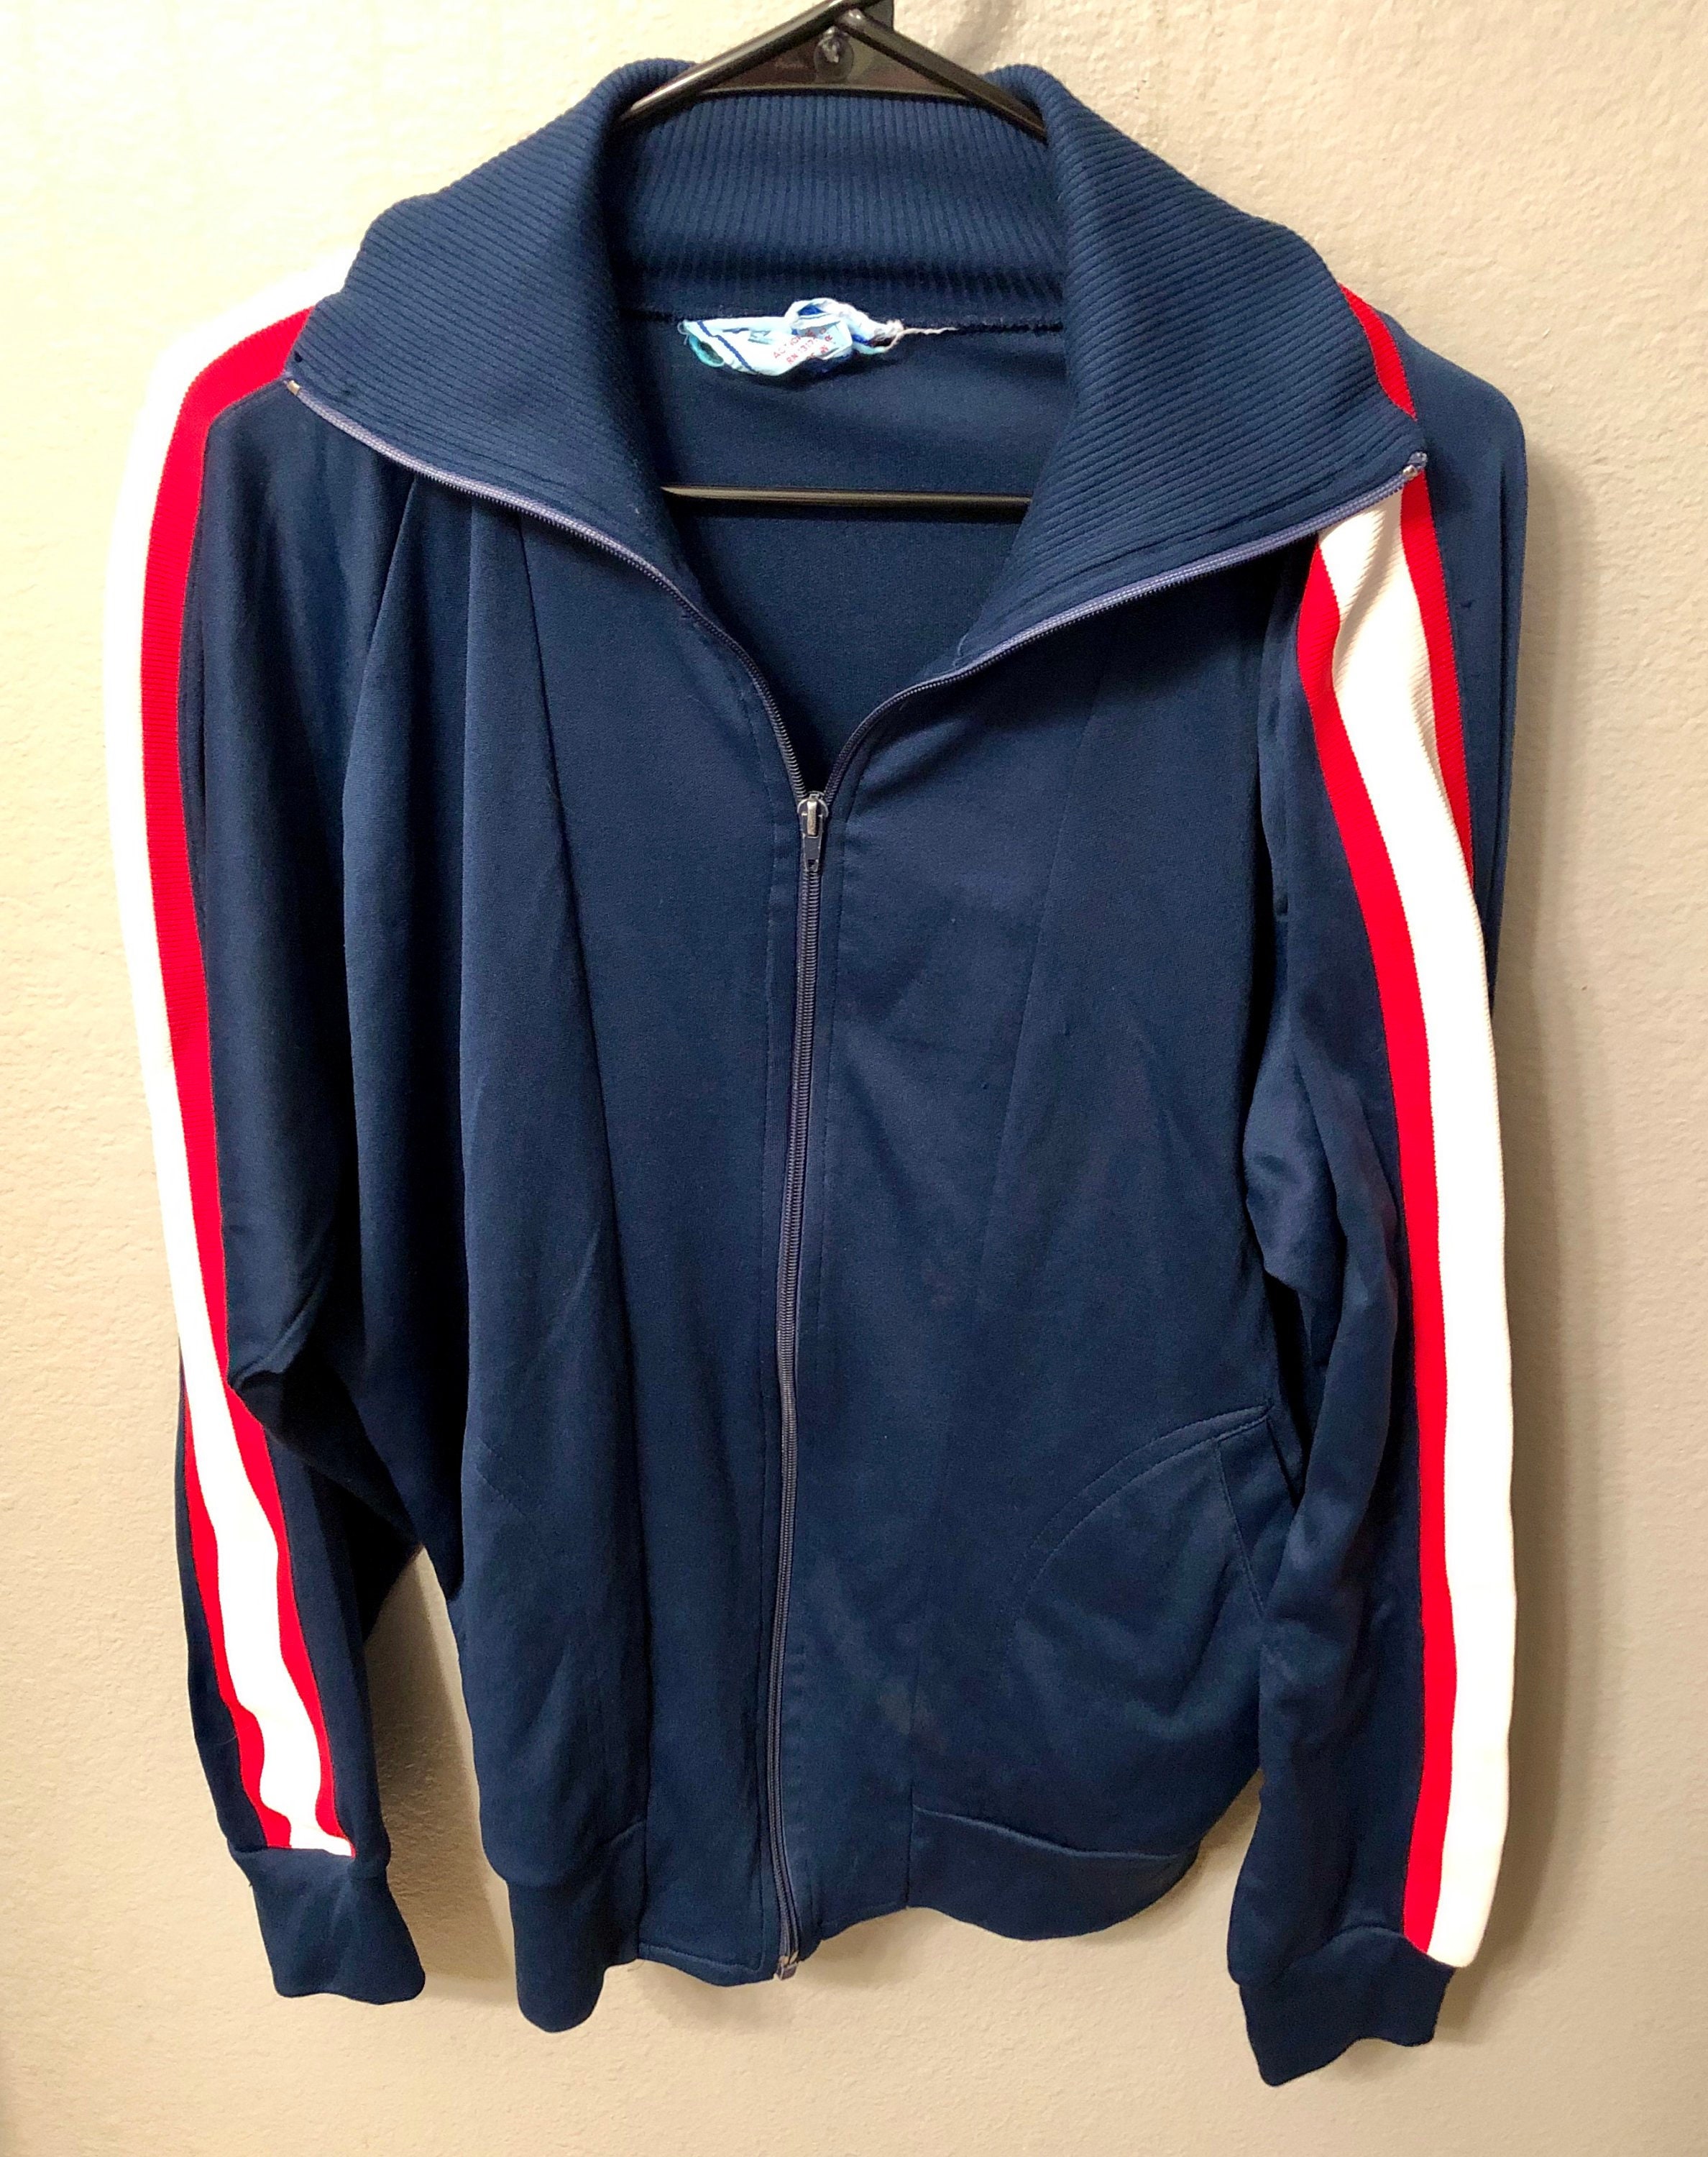 80s Track Jacket Blue Jacket with Red and White Striped | Etsy